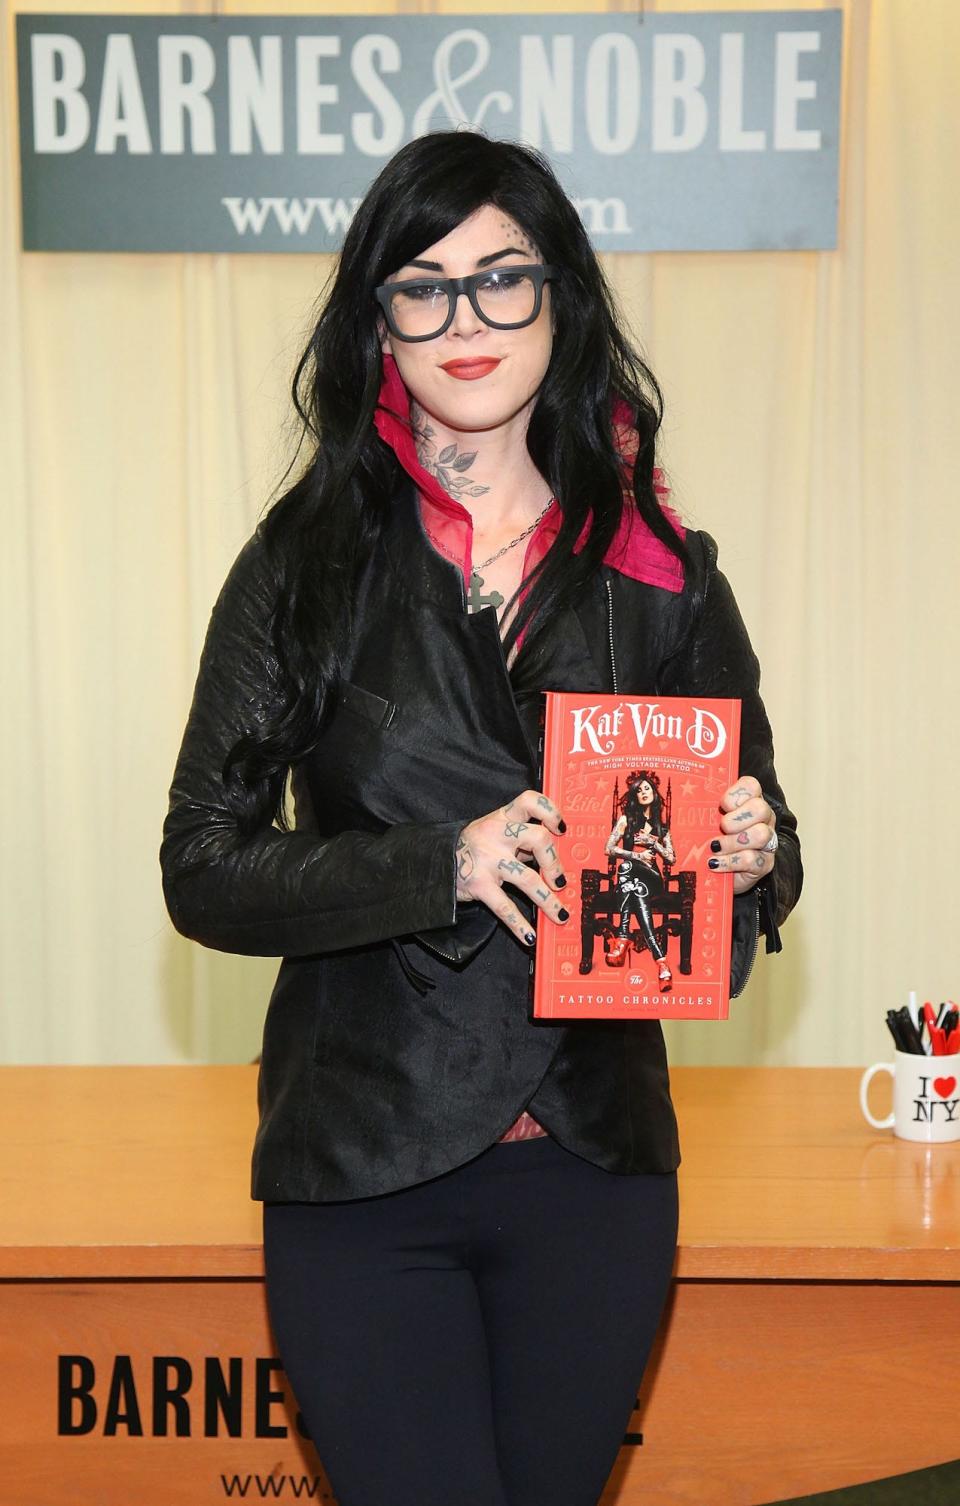 Kat Von D promotes "The Tattoo Chronicles" at Barnes & Noble in New York City.